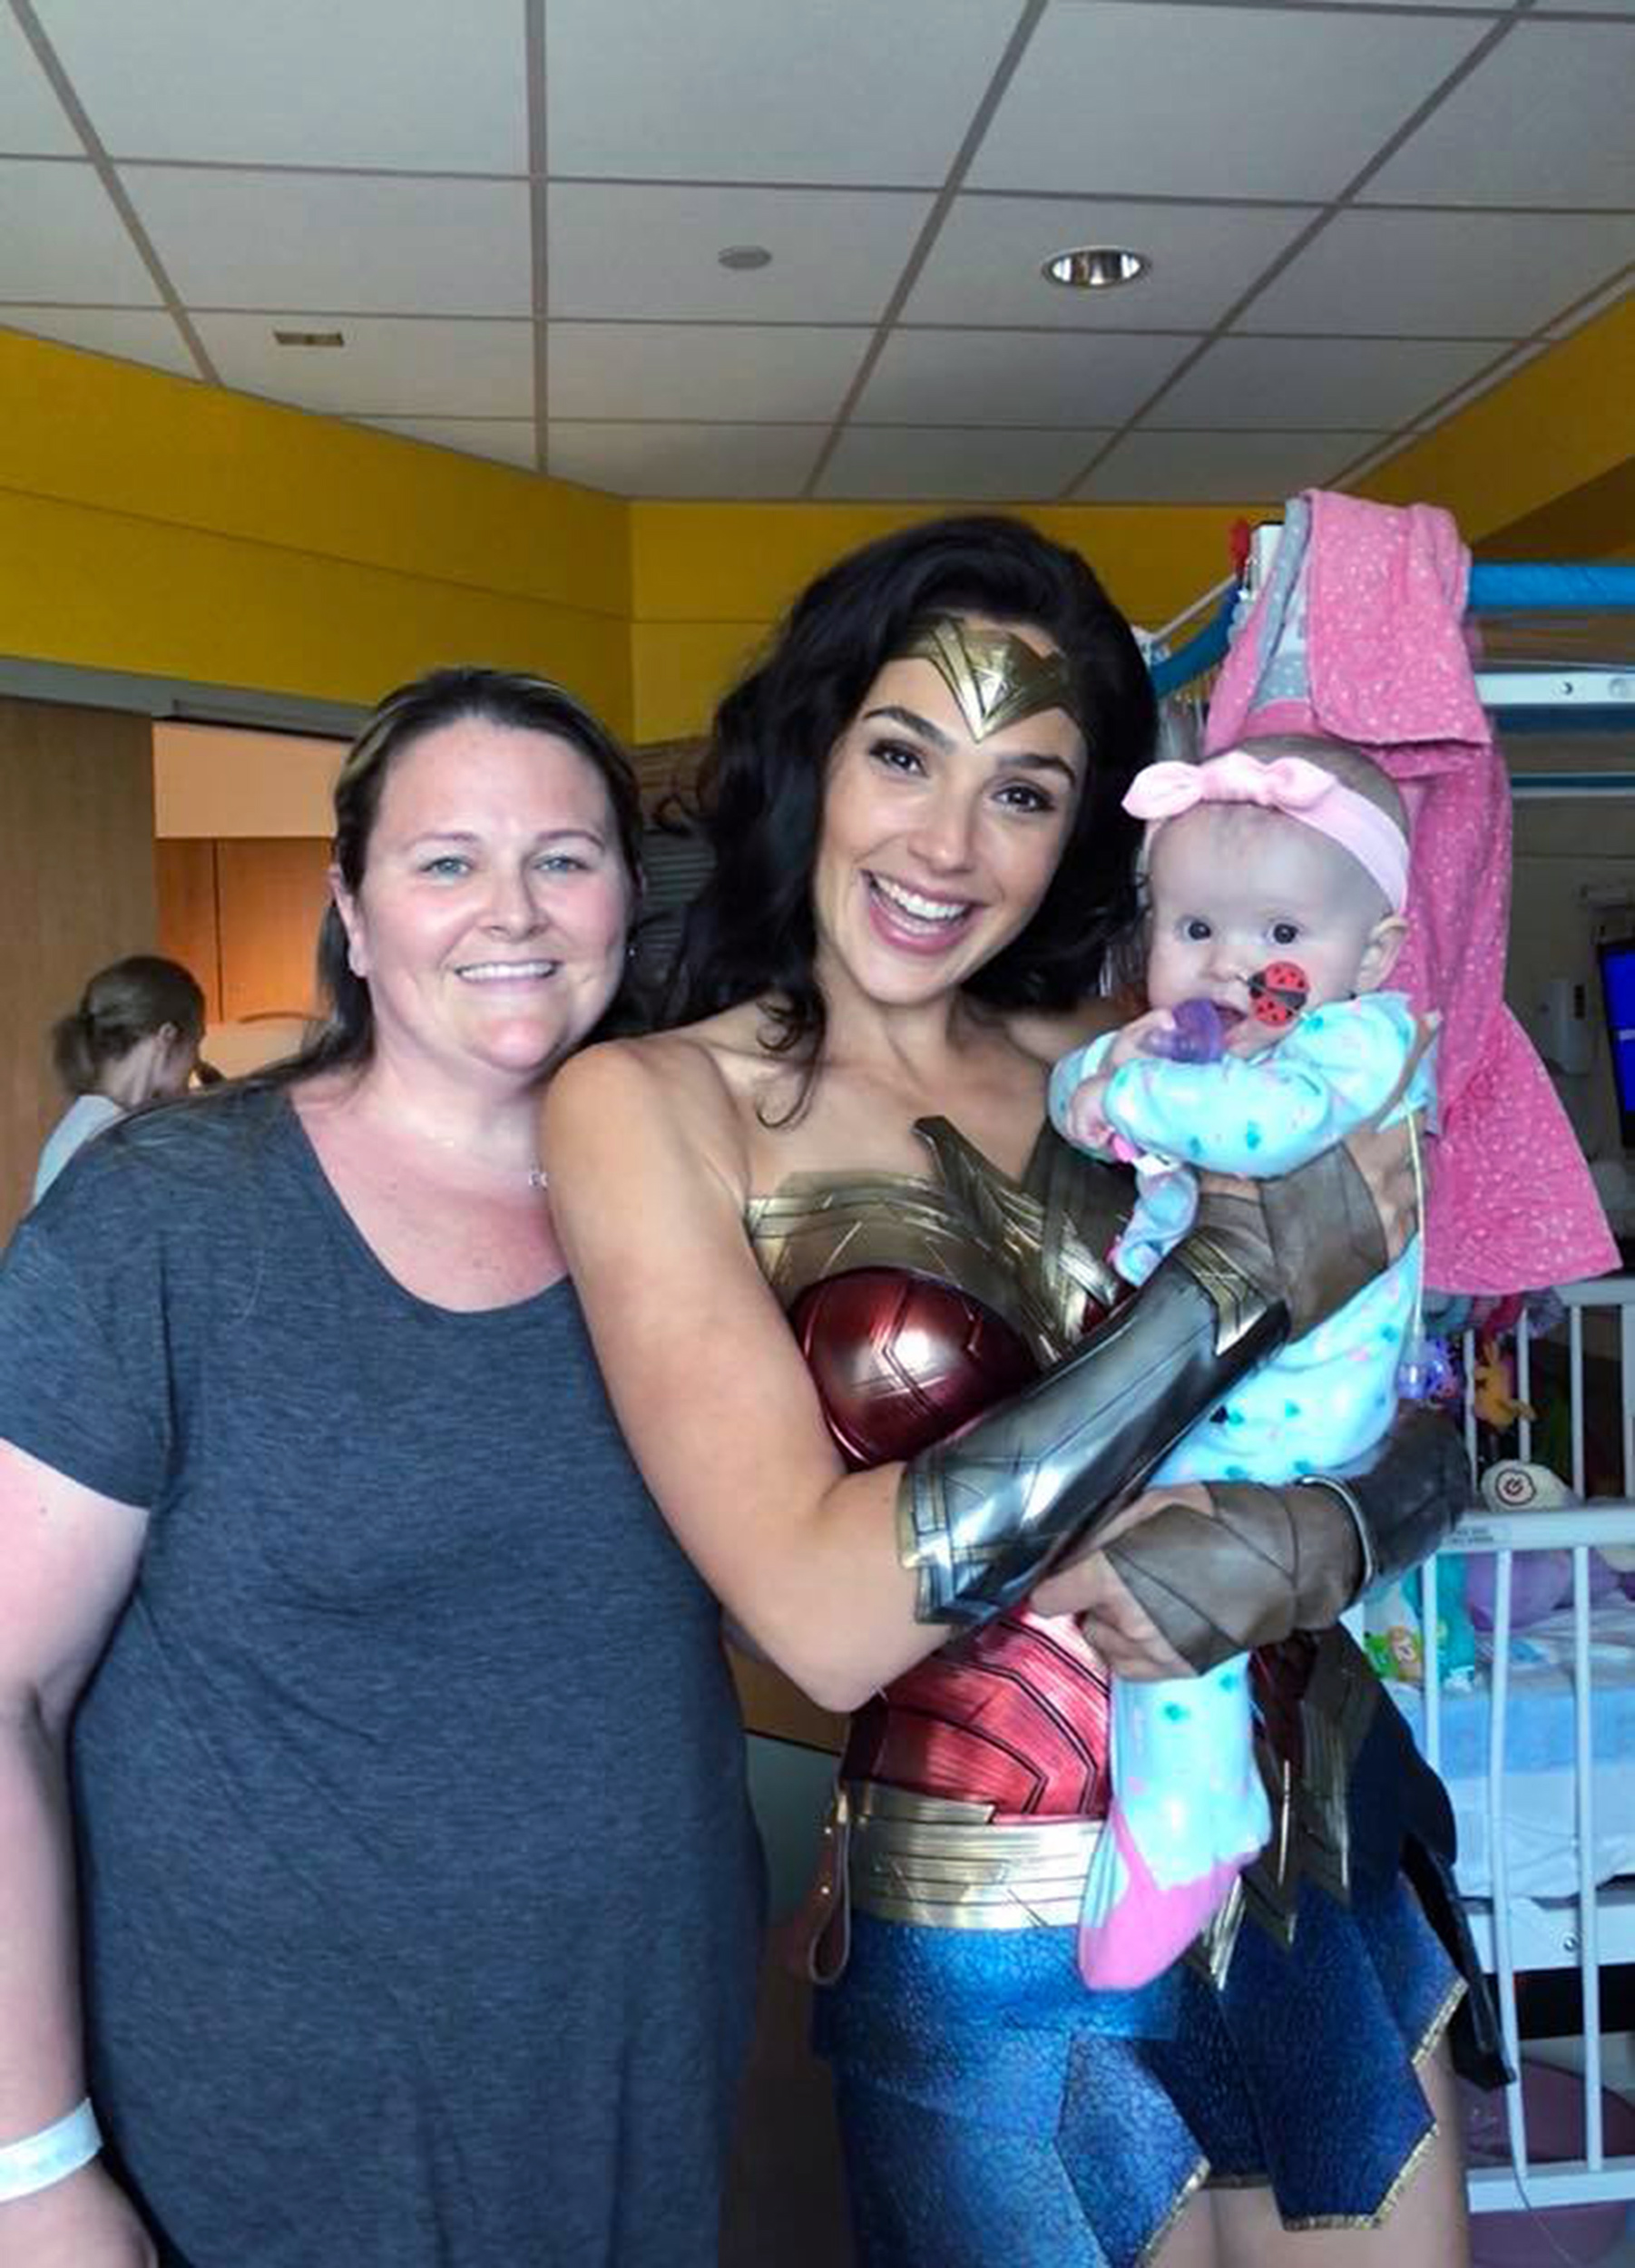 PHOTO: Actress Gal Gadot poses for a photo with Kelly Swink Sahady while holding 7-month-old Karalyne Sahady, who is being treated for acute myeloid leukemia, at Inova Children's Hospital in Falls Church, Va., July 6, 2018.